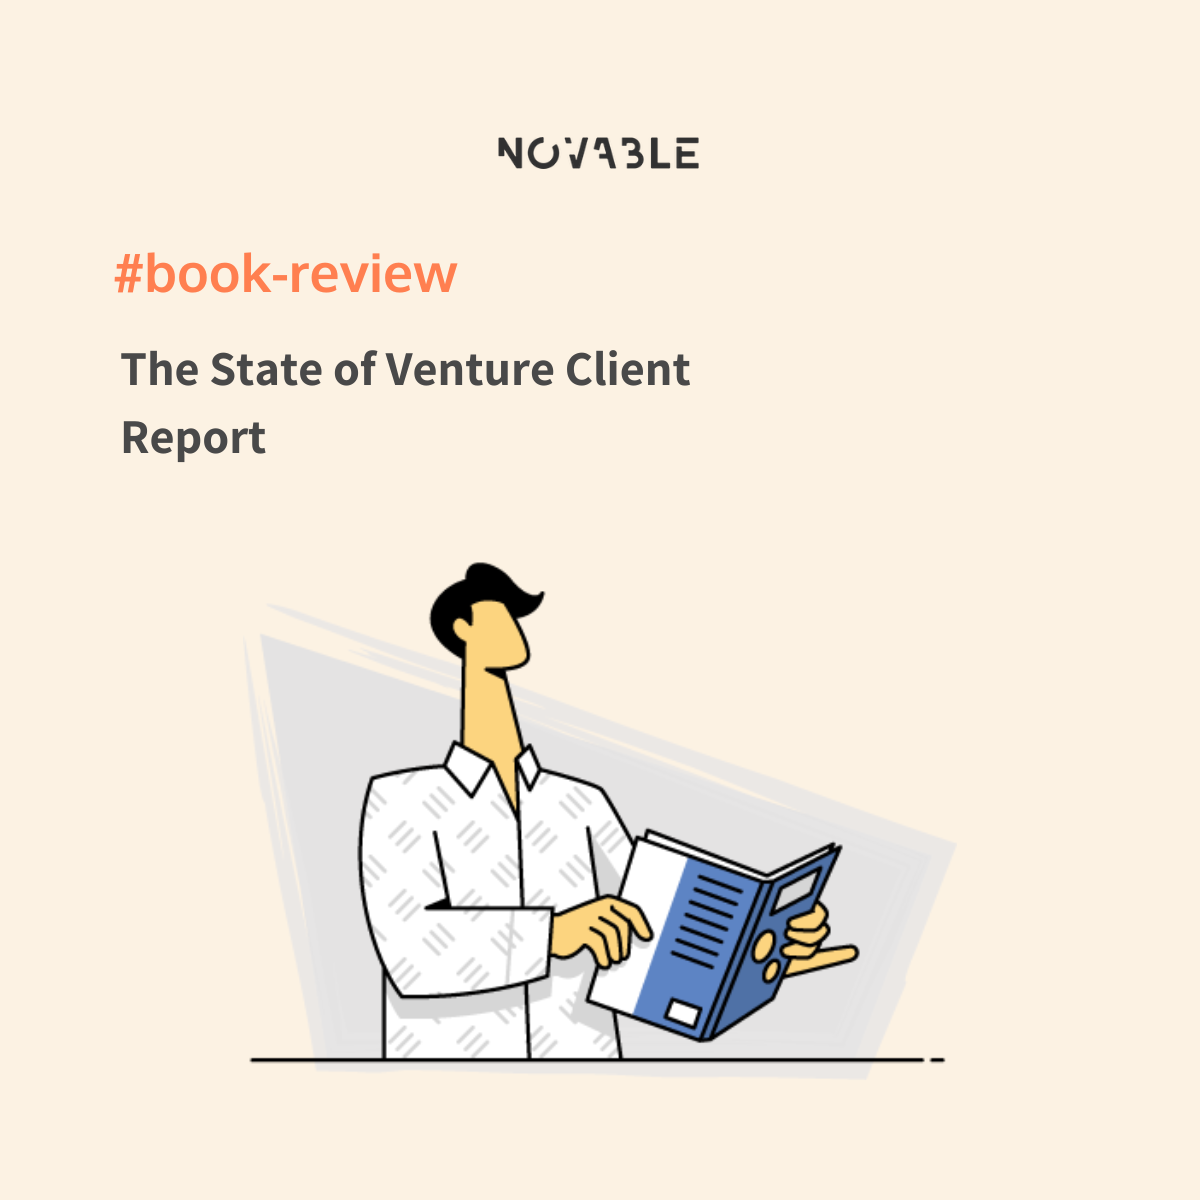 the state of venture client report book review